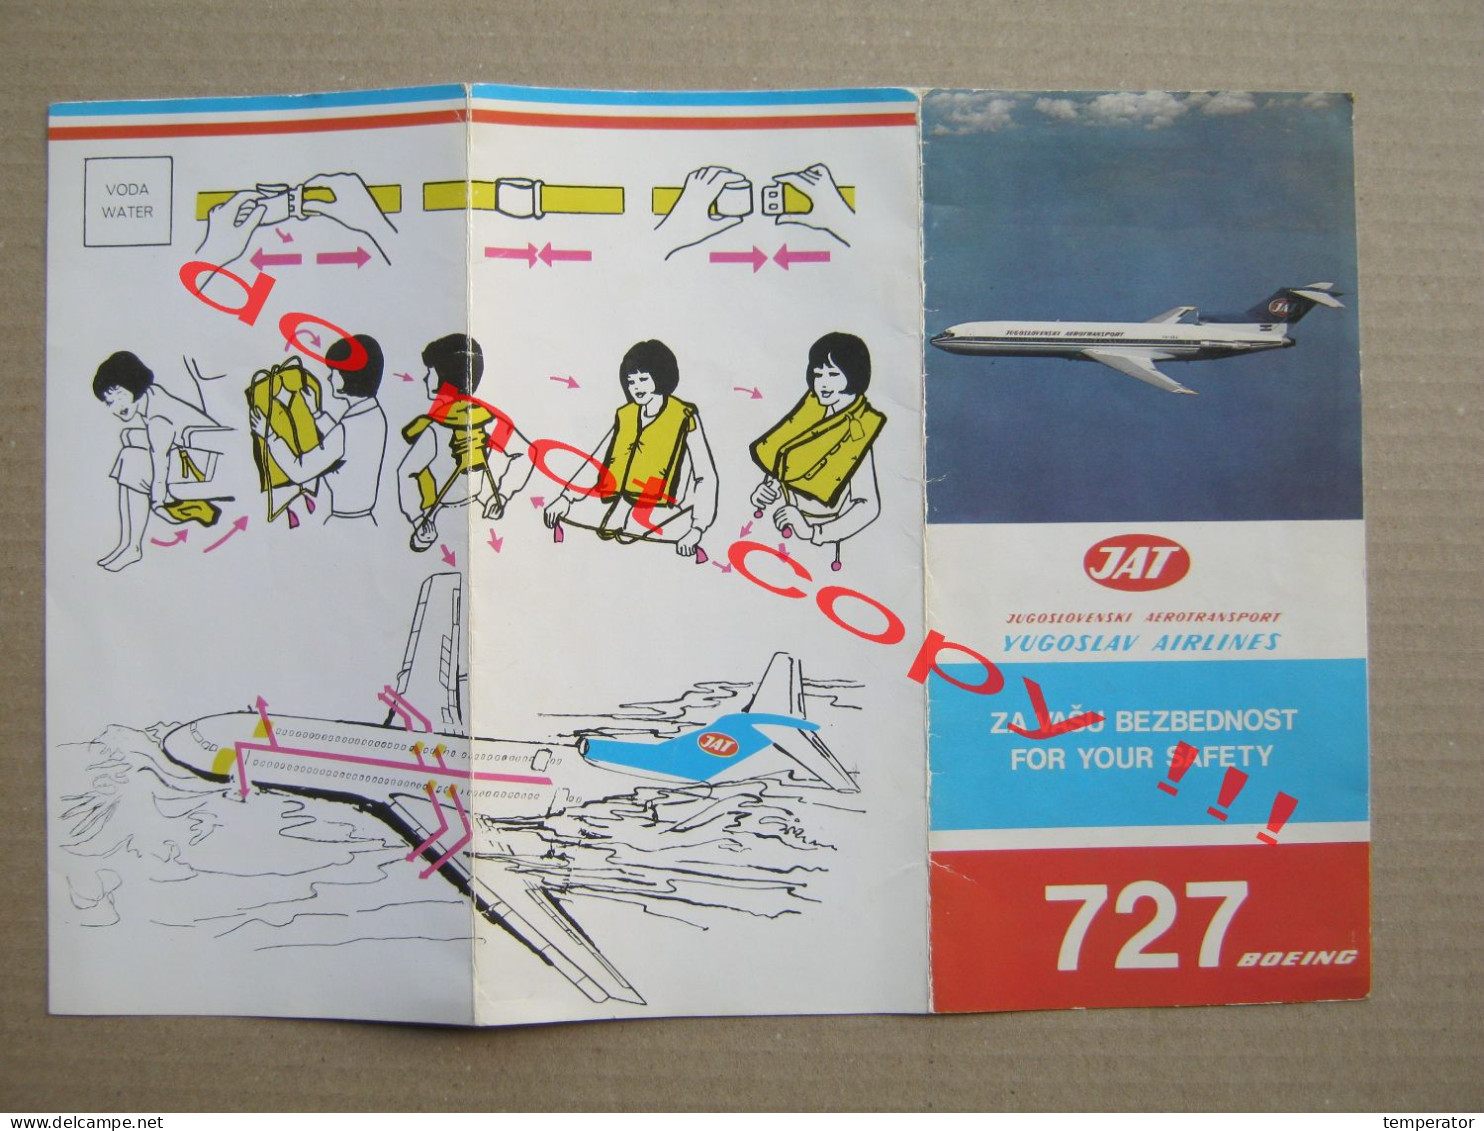 JAT YUGOSLAV AIRLINES - 727 BOEING ( FOR YOUR SAFETY ... ) - Advertisements